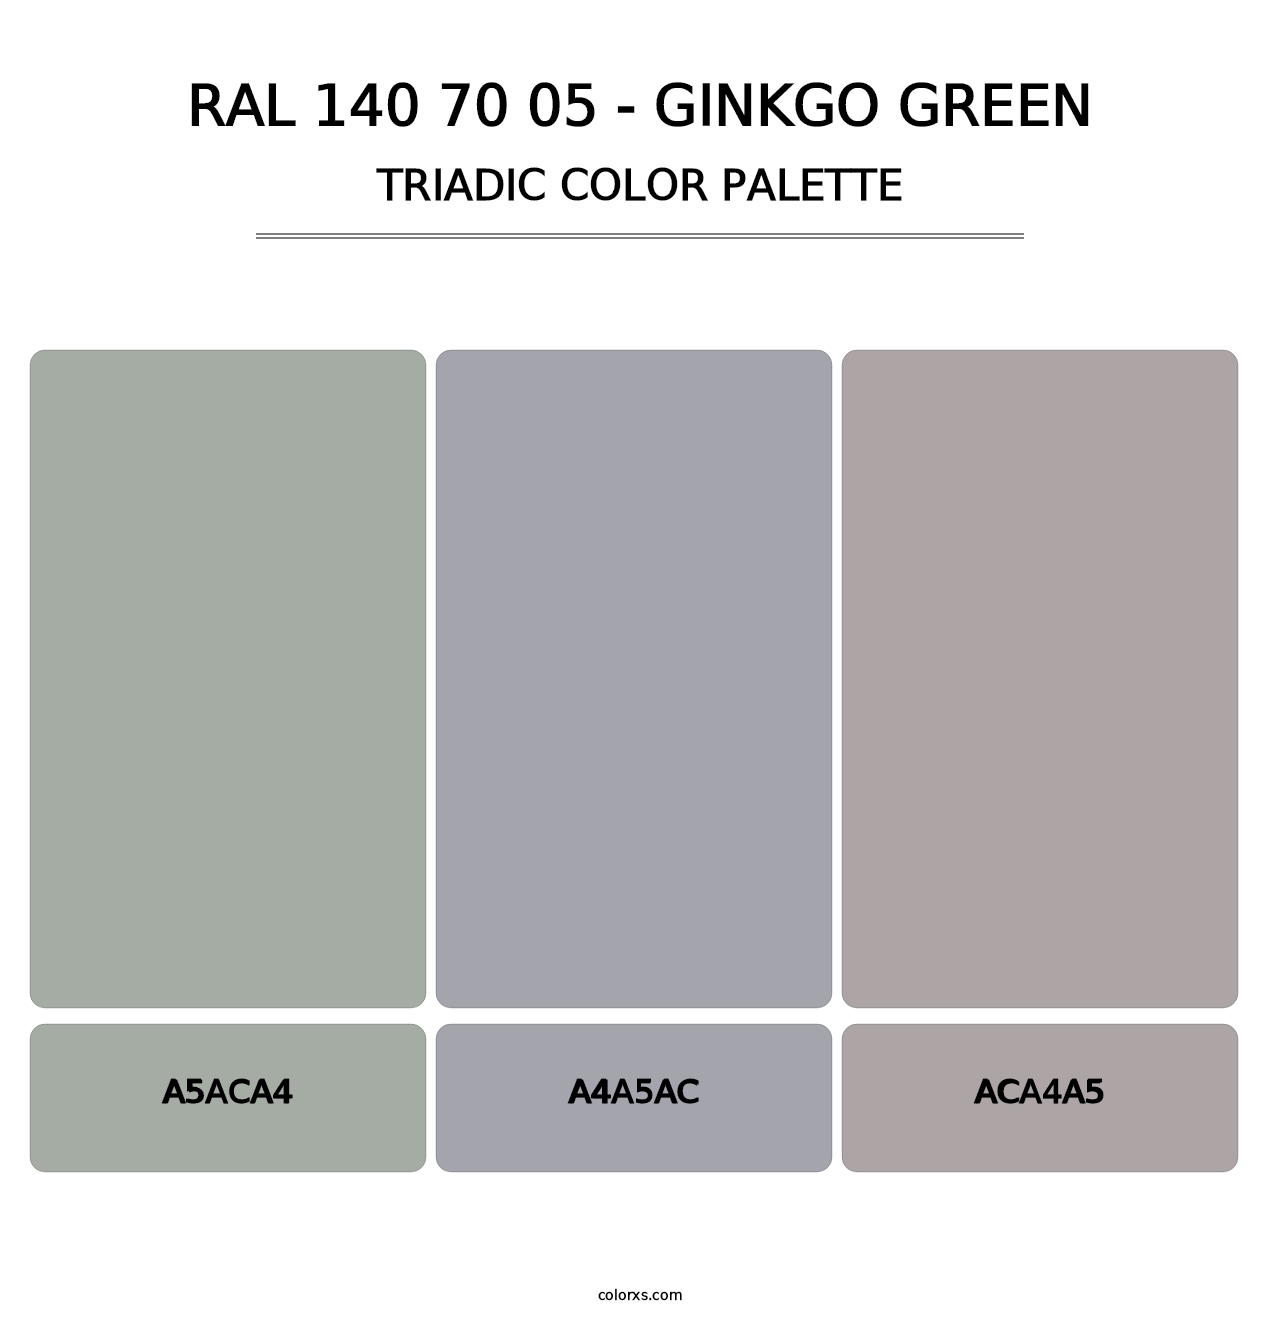 RAL 140 70 05 - Ginkgo Green - Triadic Color Palette